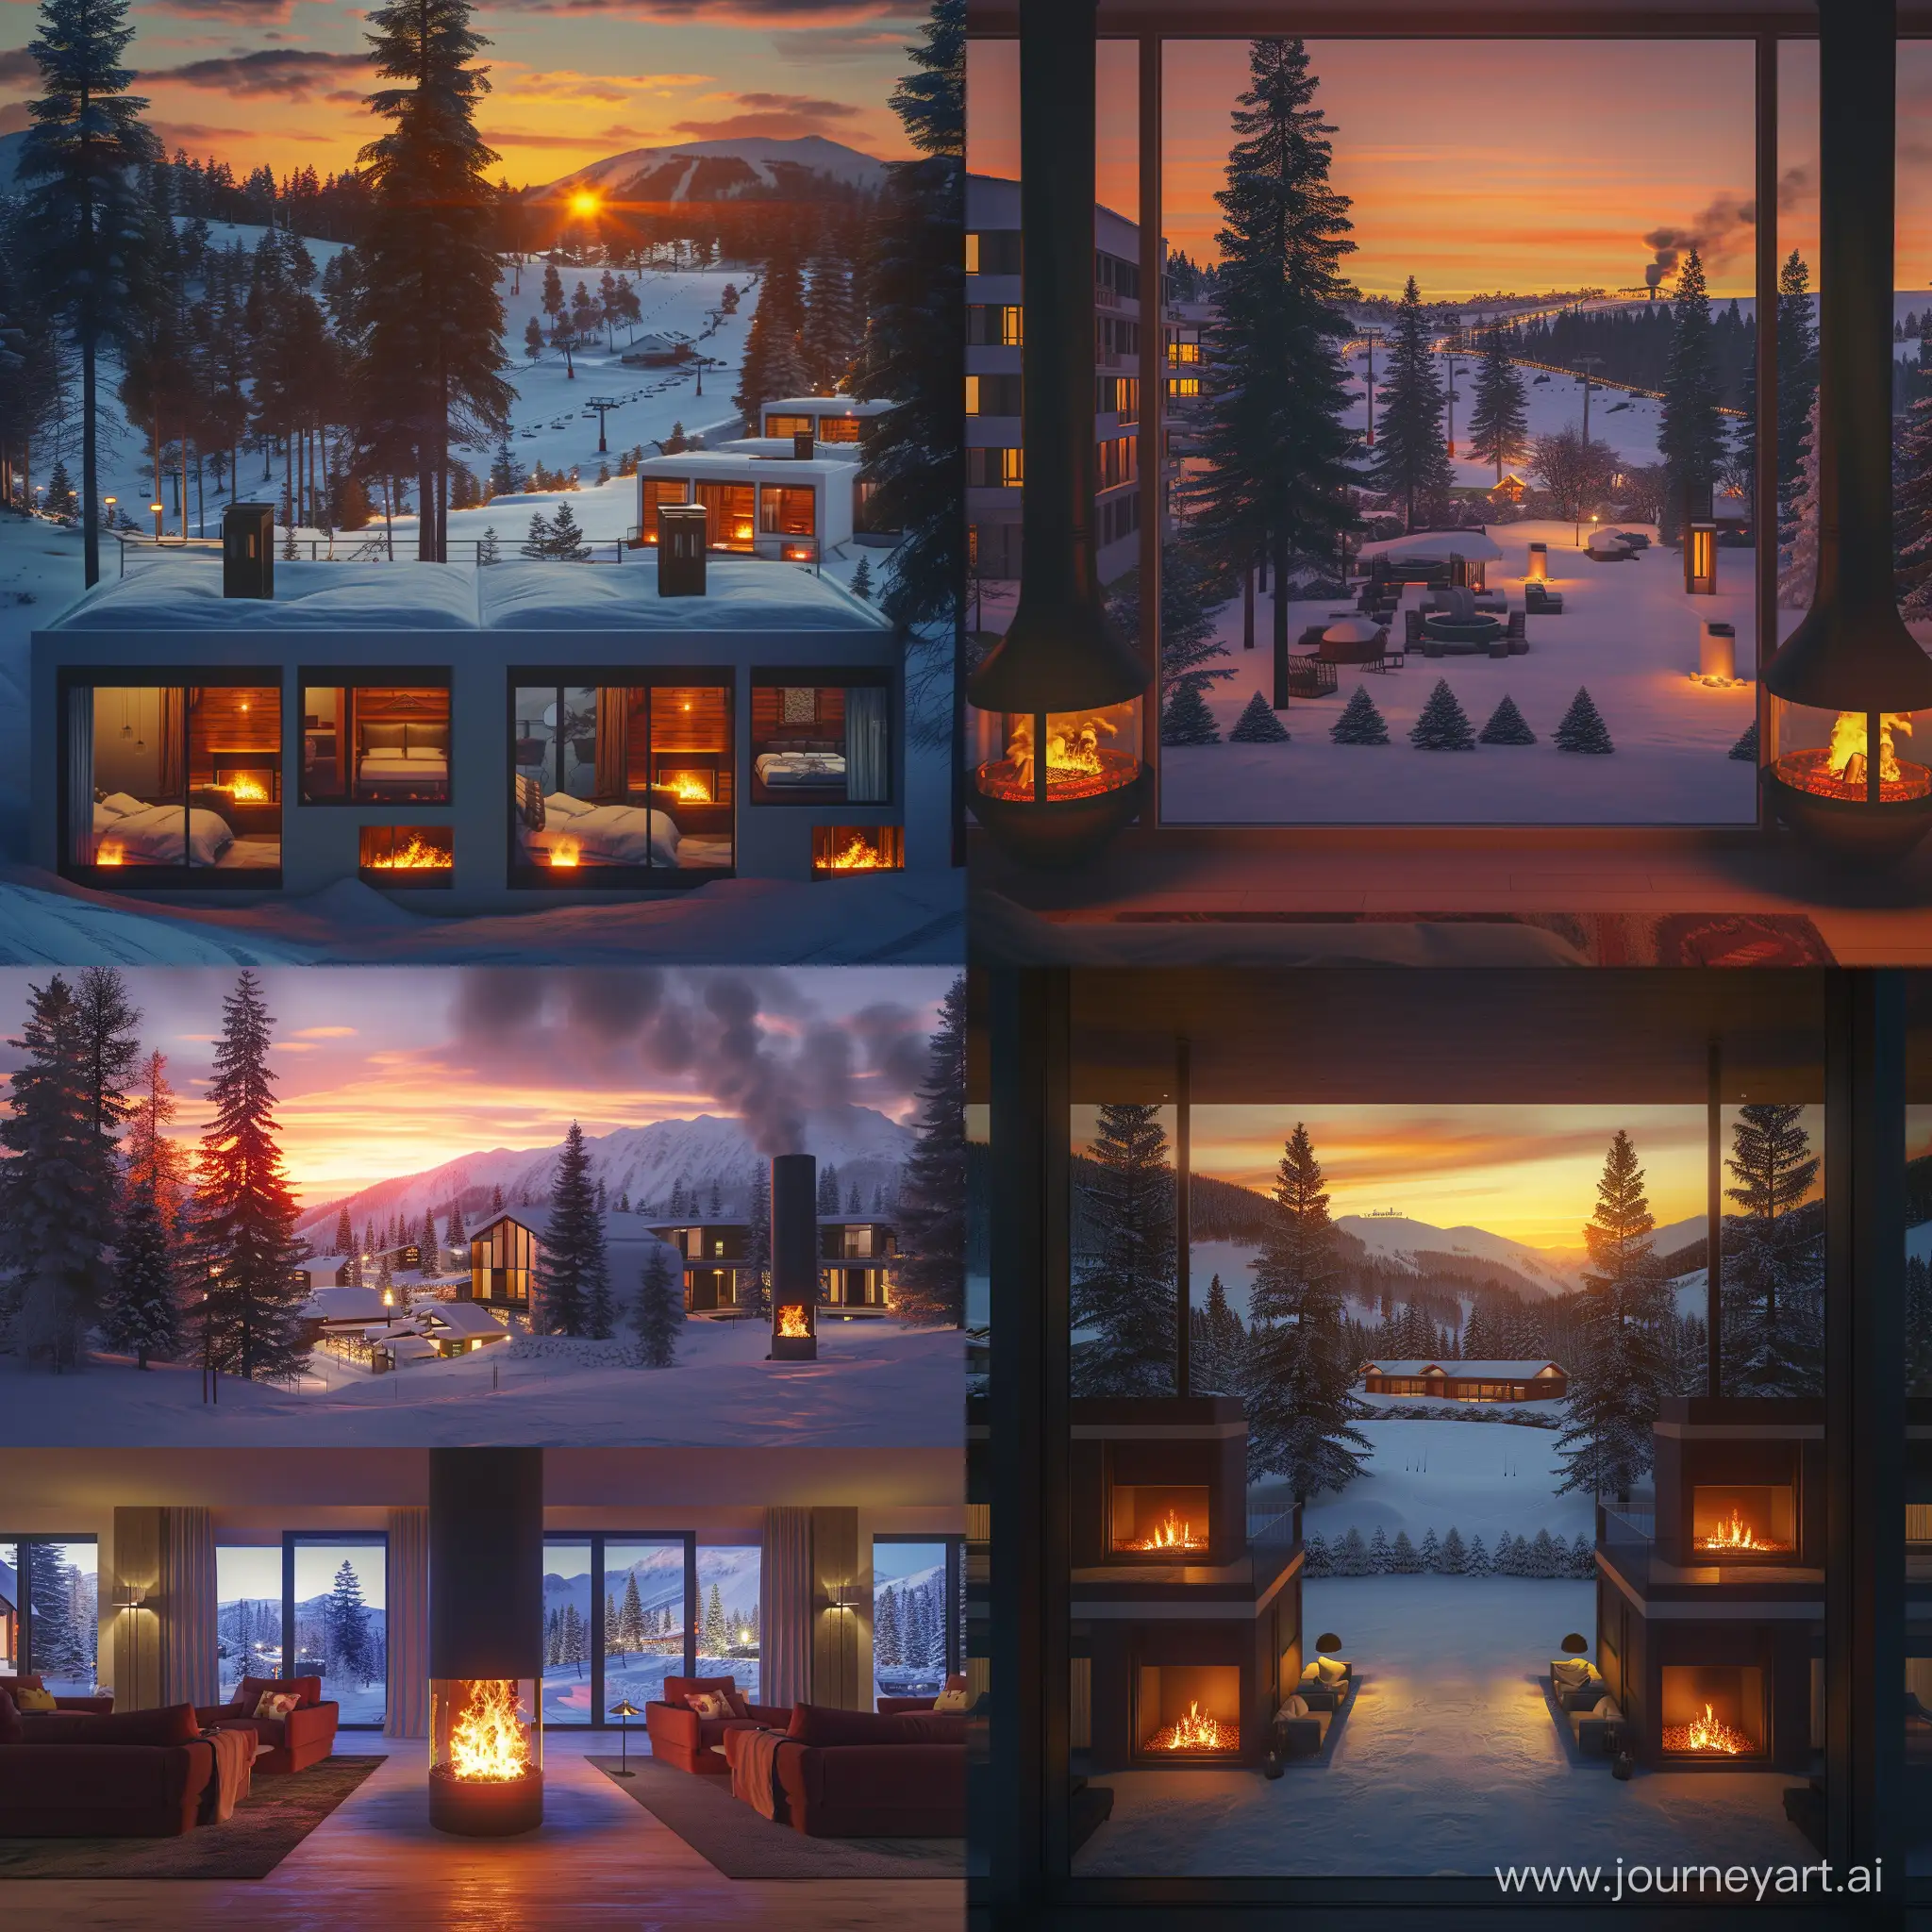 photorealistic ,canon 5D, Hotel rooms on a snowy mountain, sunset light, bright interior lights, near a ski resort, with a view of the ski resort and landscaping in the yard, with living rooms with 3 separate fireplaces, tall pine trees.